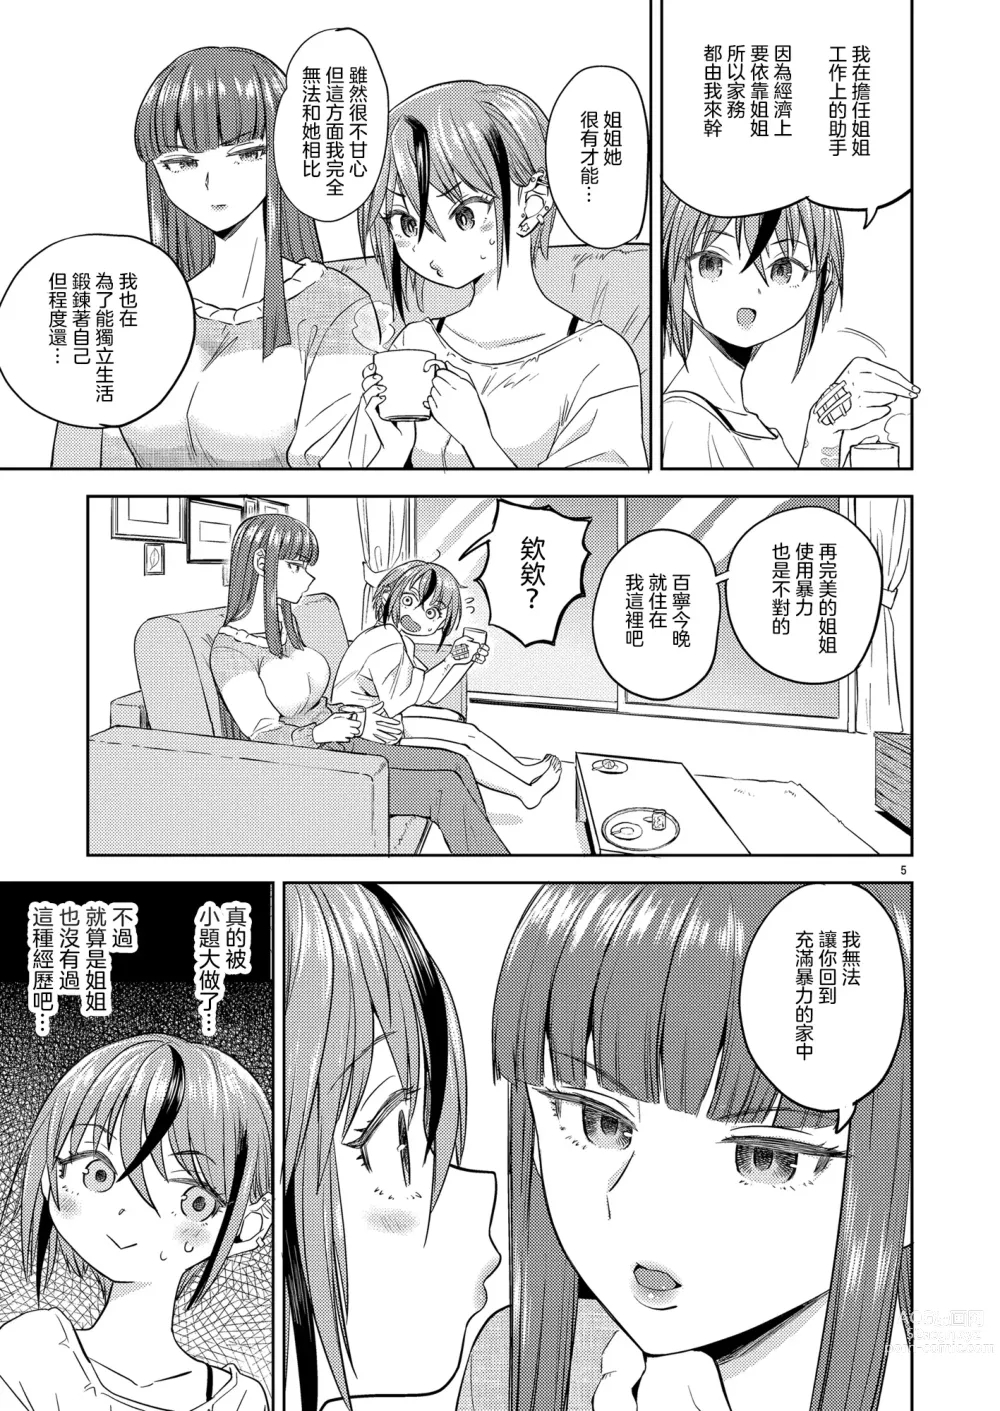 Page 7 of doujinshi 當我們全裸相擁抱之時